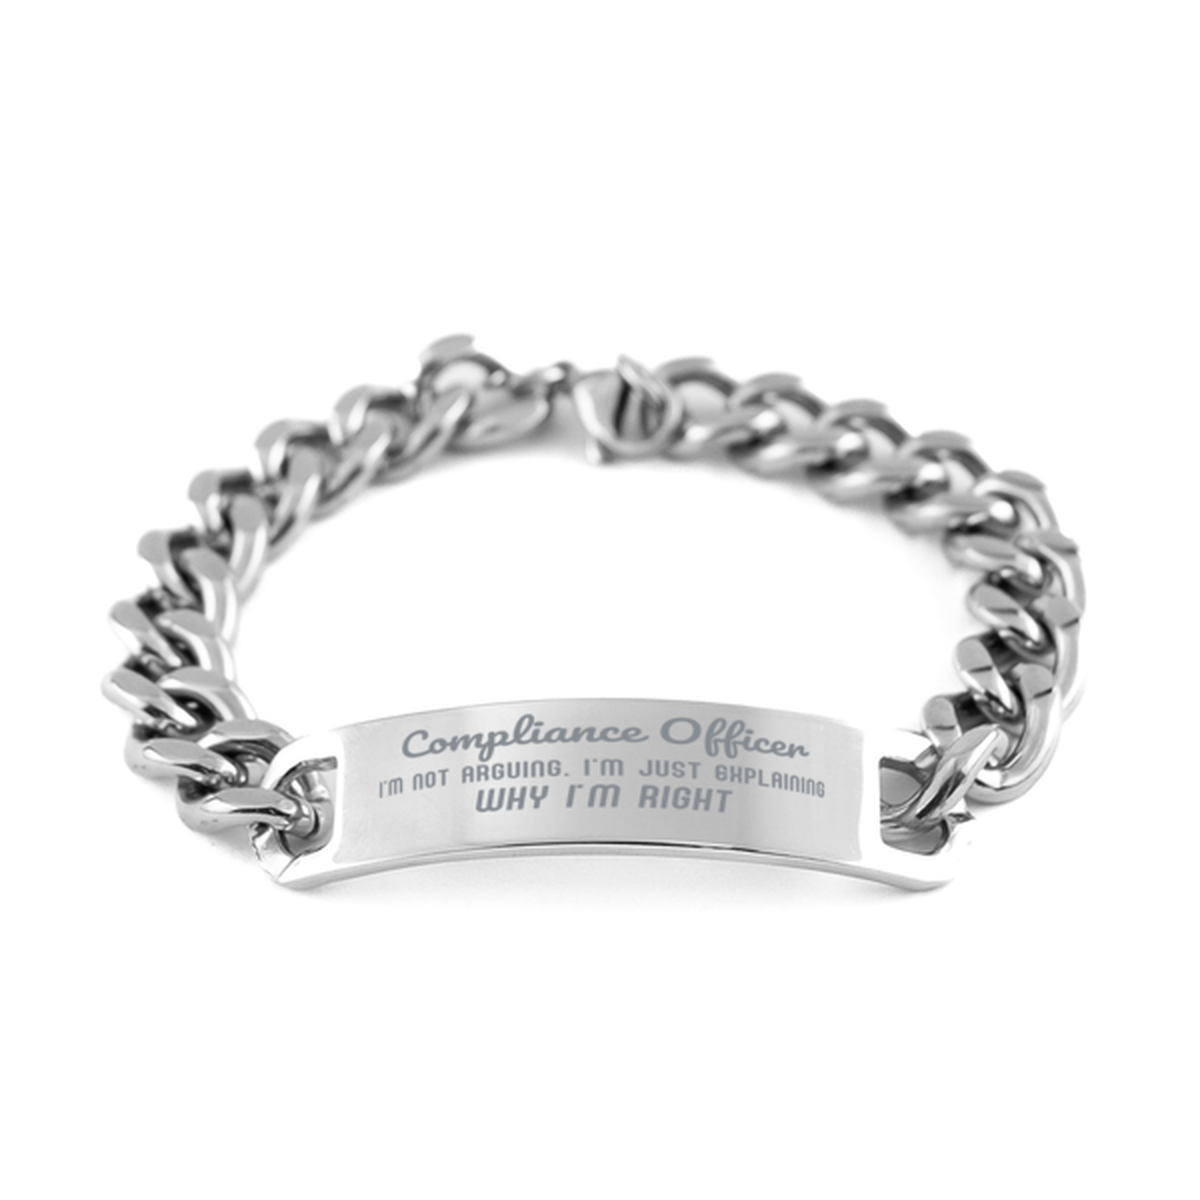 Compliance Officer I'm not Arguing. I'm Just Explaining Why I'm RIGHT Cuban Chain Stainless Steel Bracelet, Graduation Birthday Christmas Compliance Officer Gifts For Compliance Officer Funny Saying Quote Present for Men Women Coworker